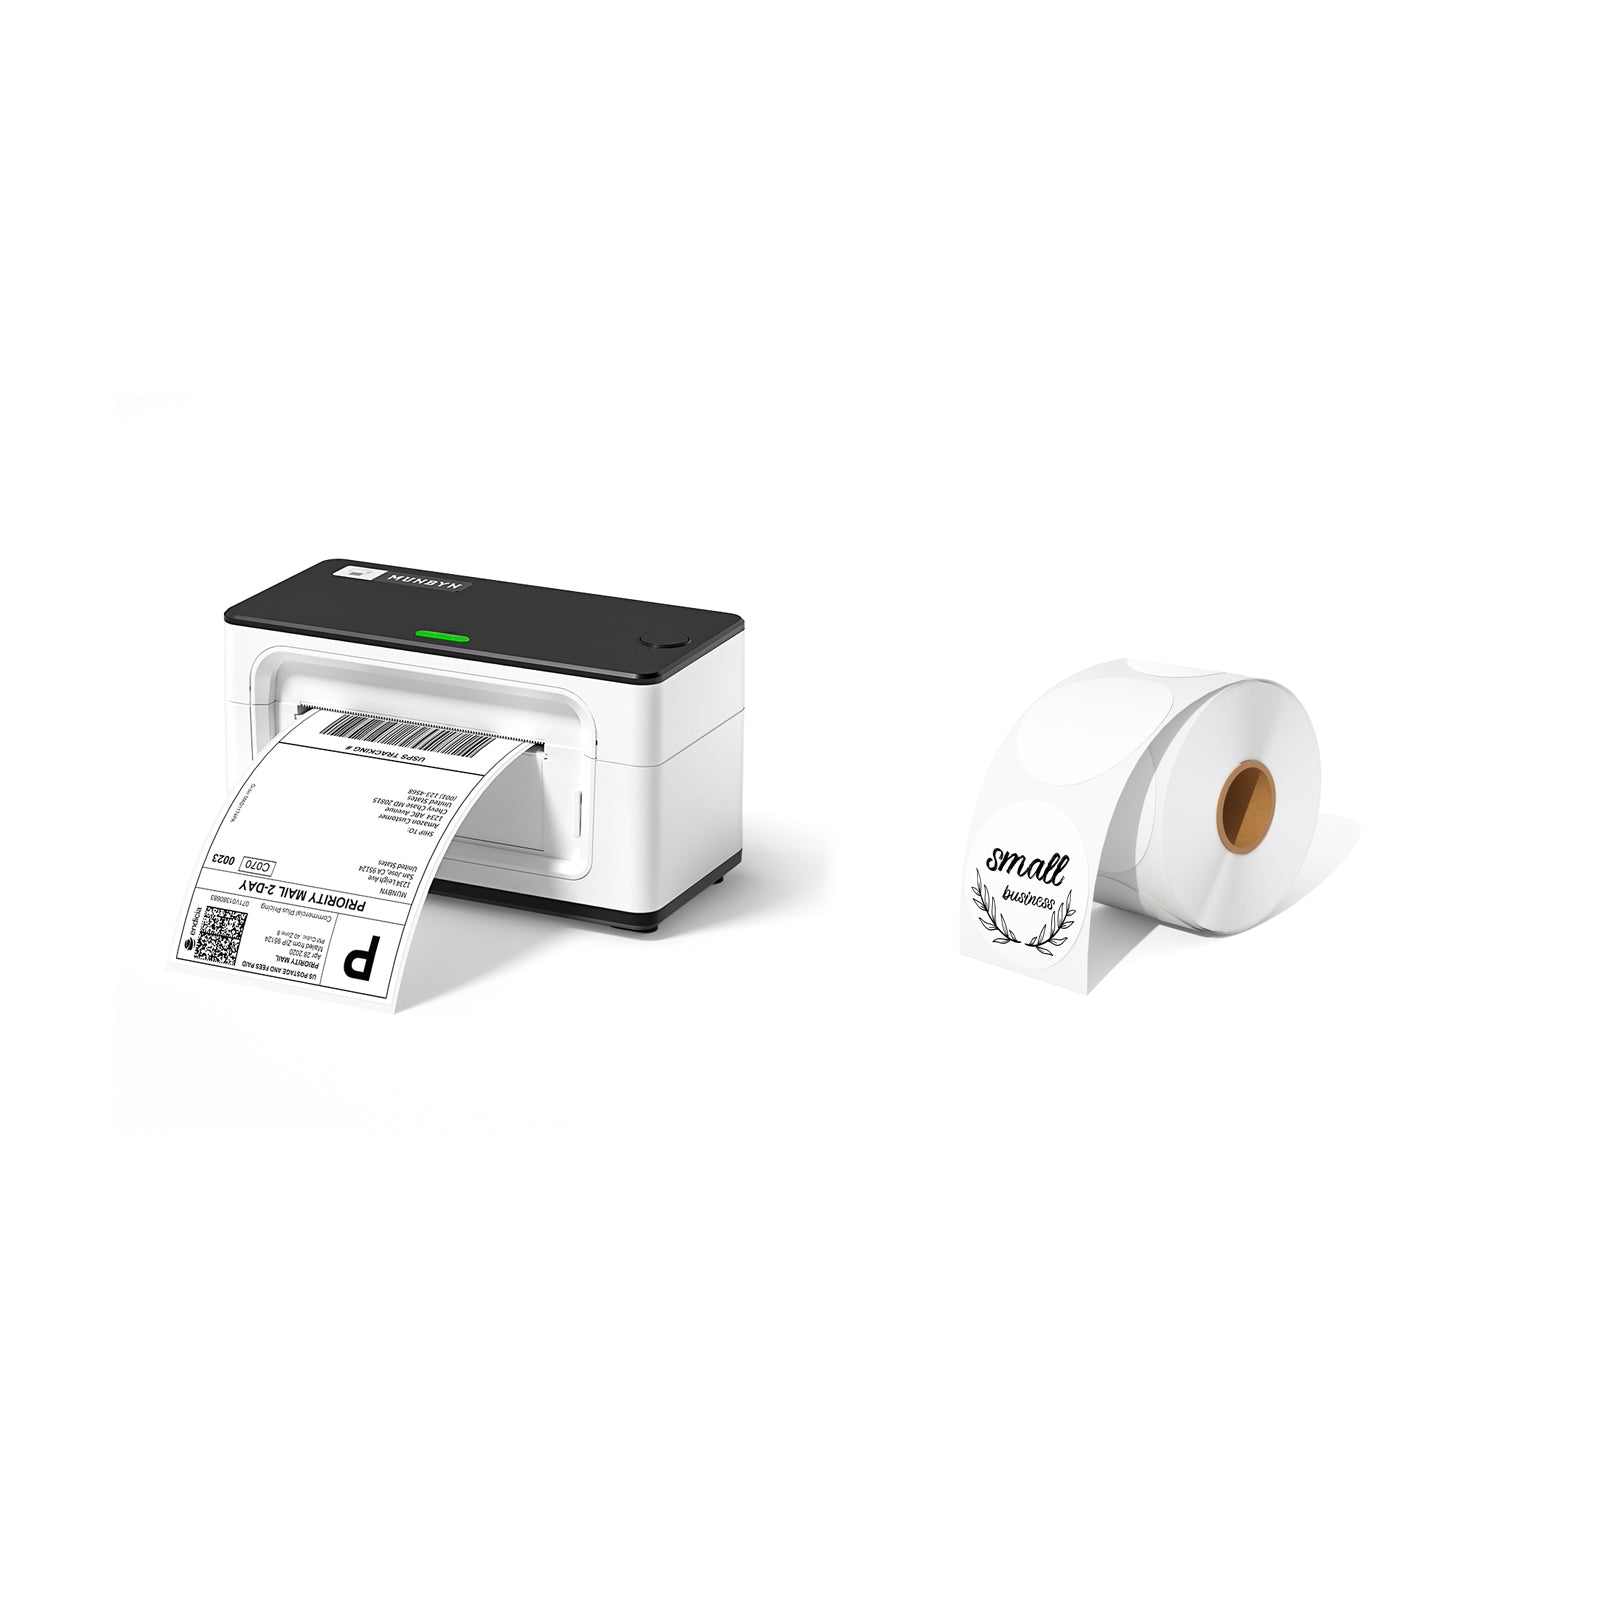 The MUNBYN P941 Pro cheap printer kit includes a thermal printer and a stack of 100mm x 150mm shipping labels.